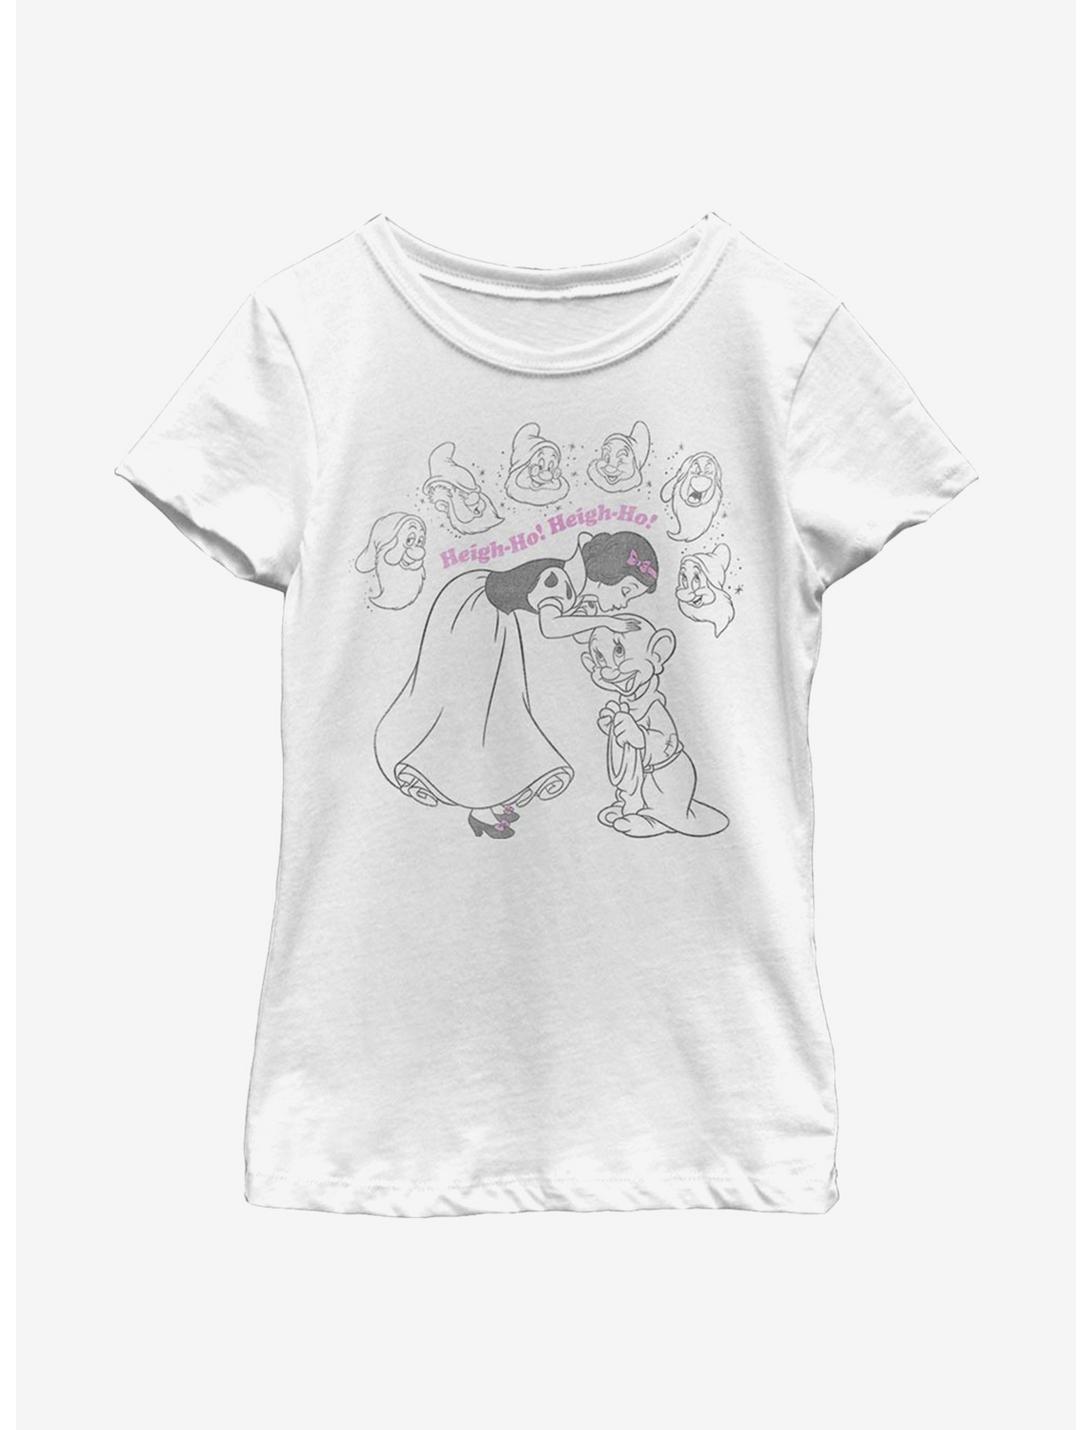 Disney Snow White And The Seven Dwarfs Heigh-Ho Youth Girls T-Shirt, WHITE, hi-res